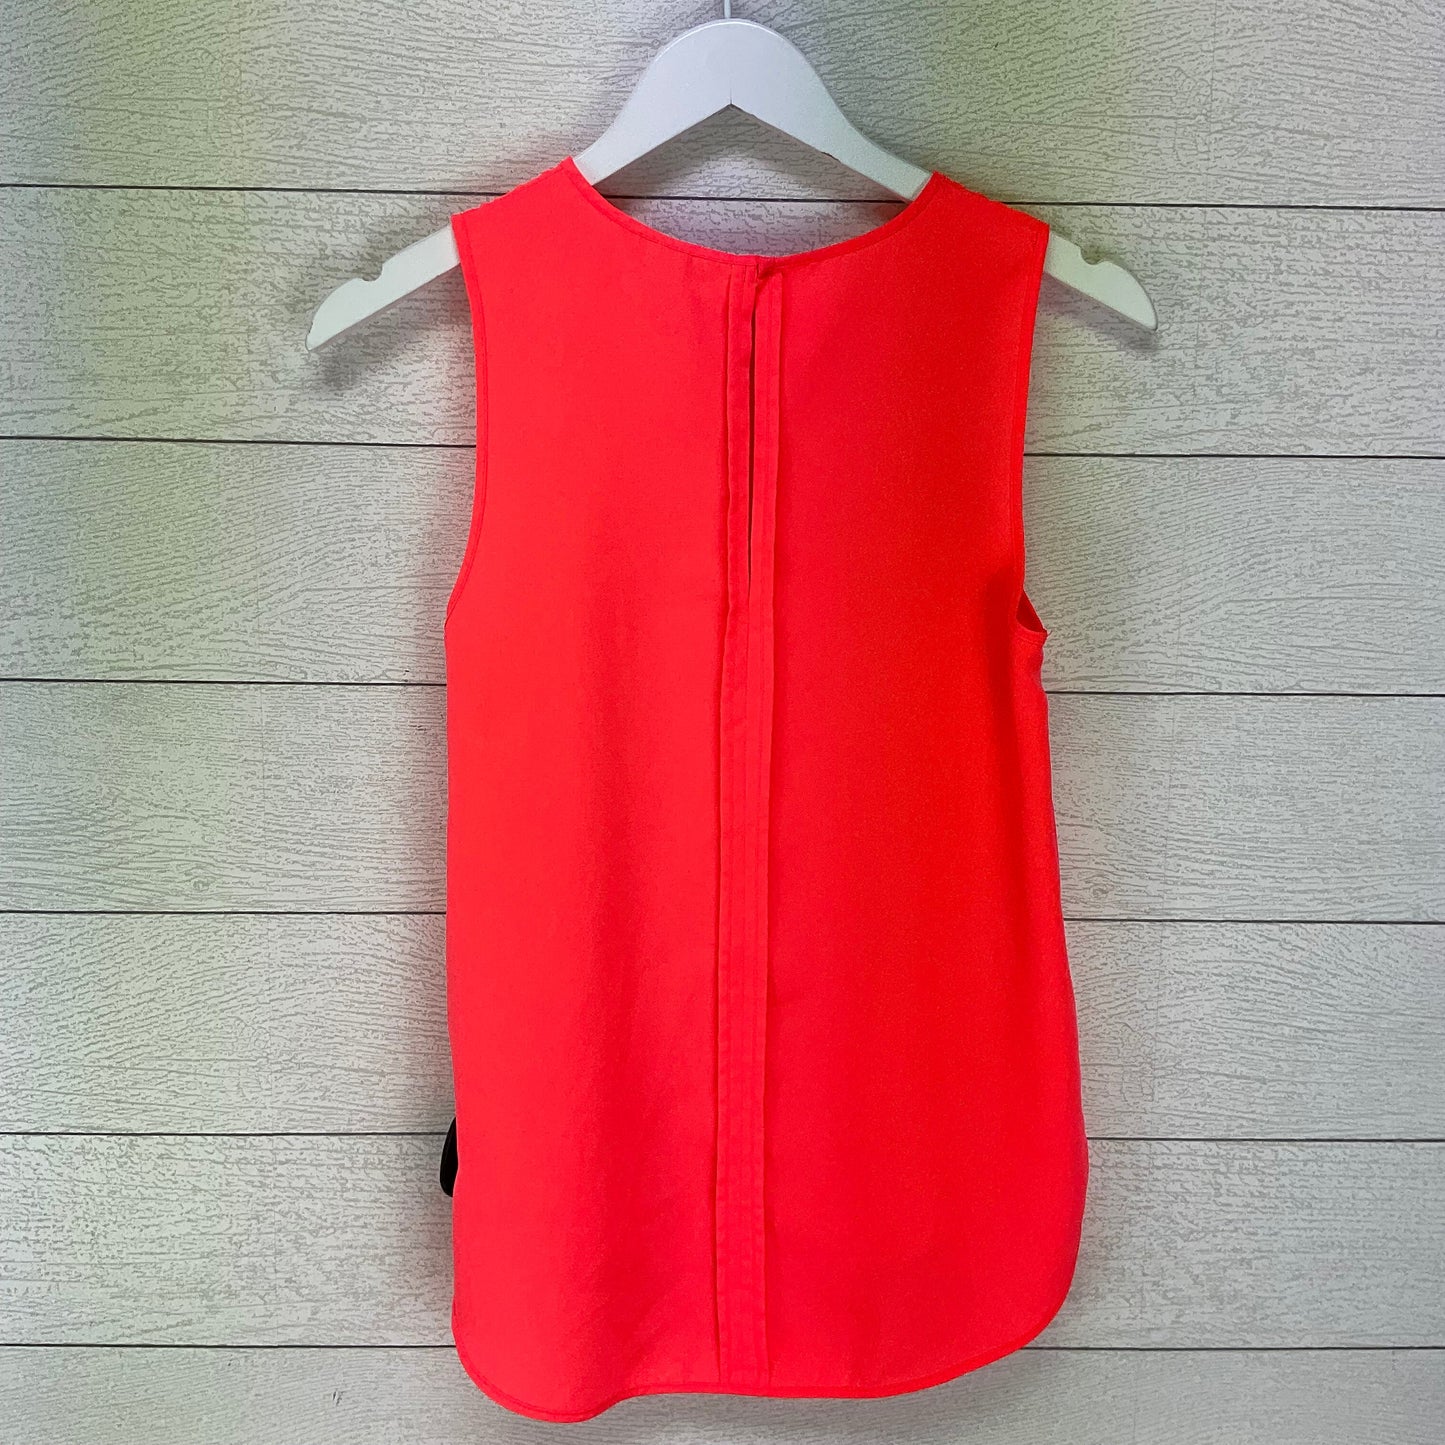 Top Sleeveless Basic By H&m  Size: 2